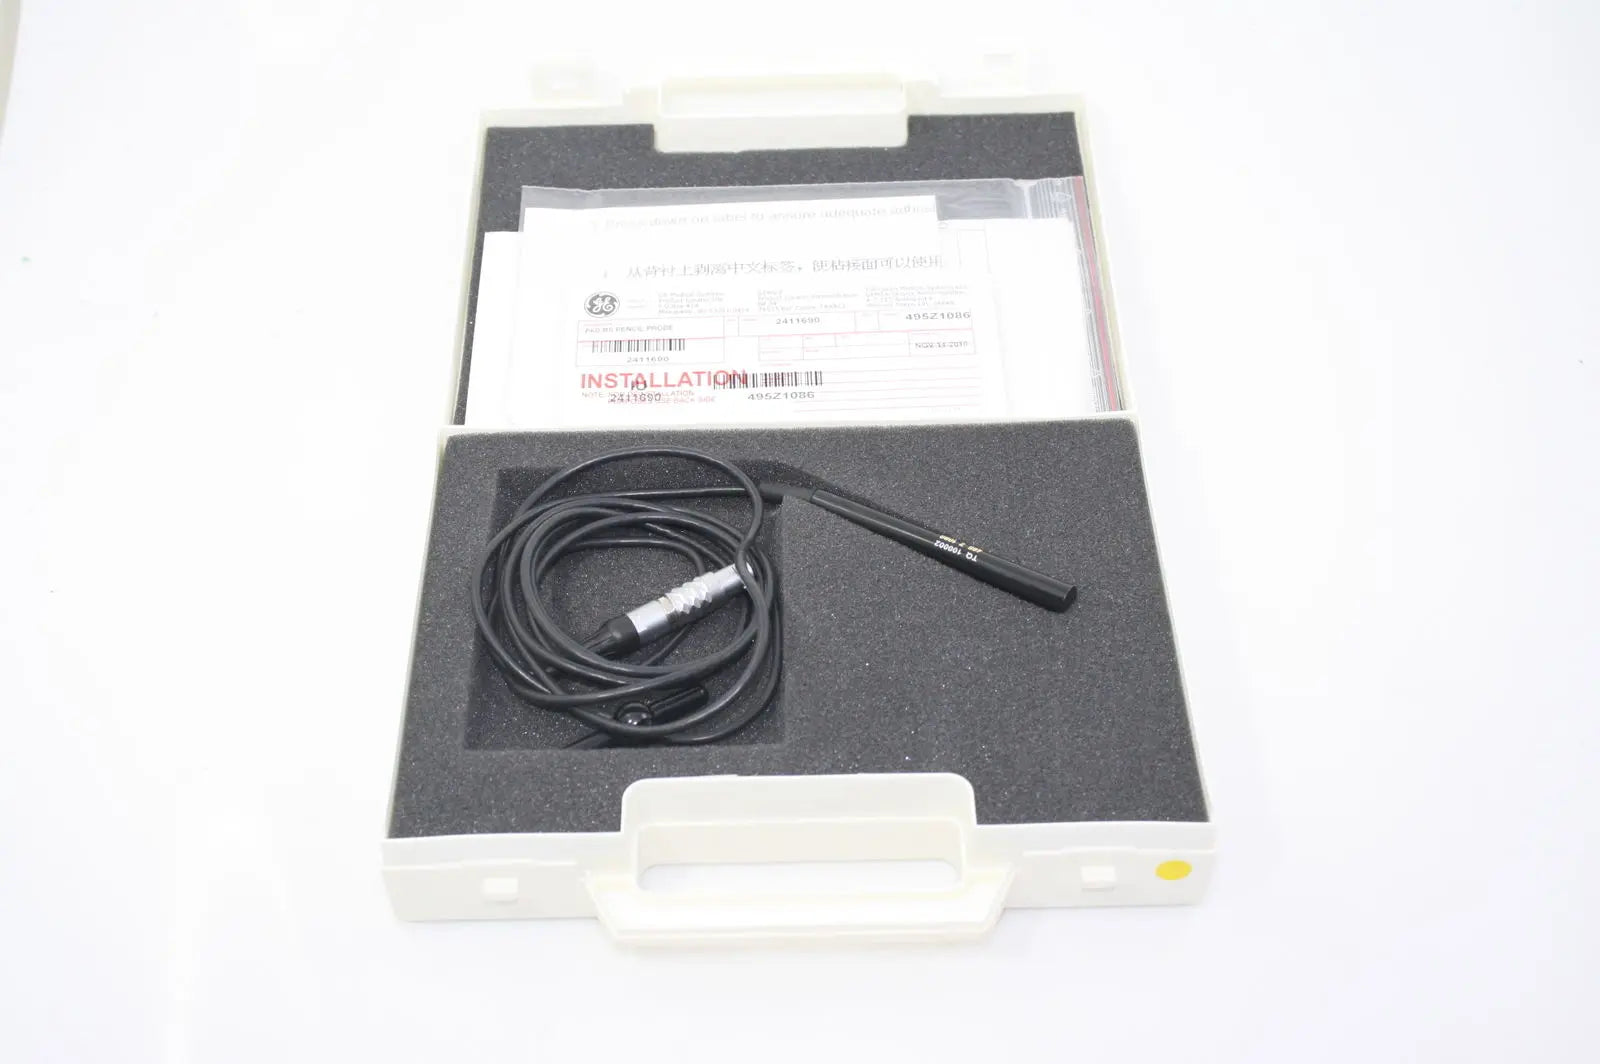 NEW P6D-RS Ultrasound Pencil Probe Transducer- TESTED DIAGNOSTIC ULTRASOUND MACHINES FOR SALE